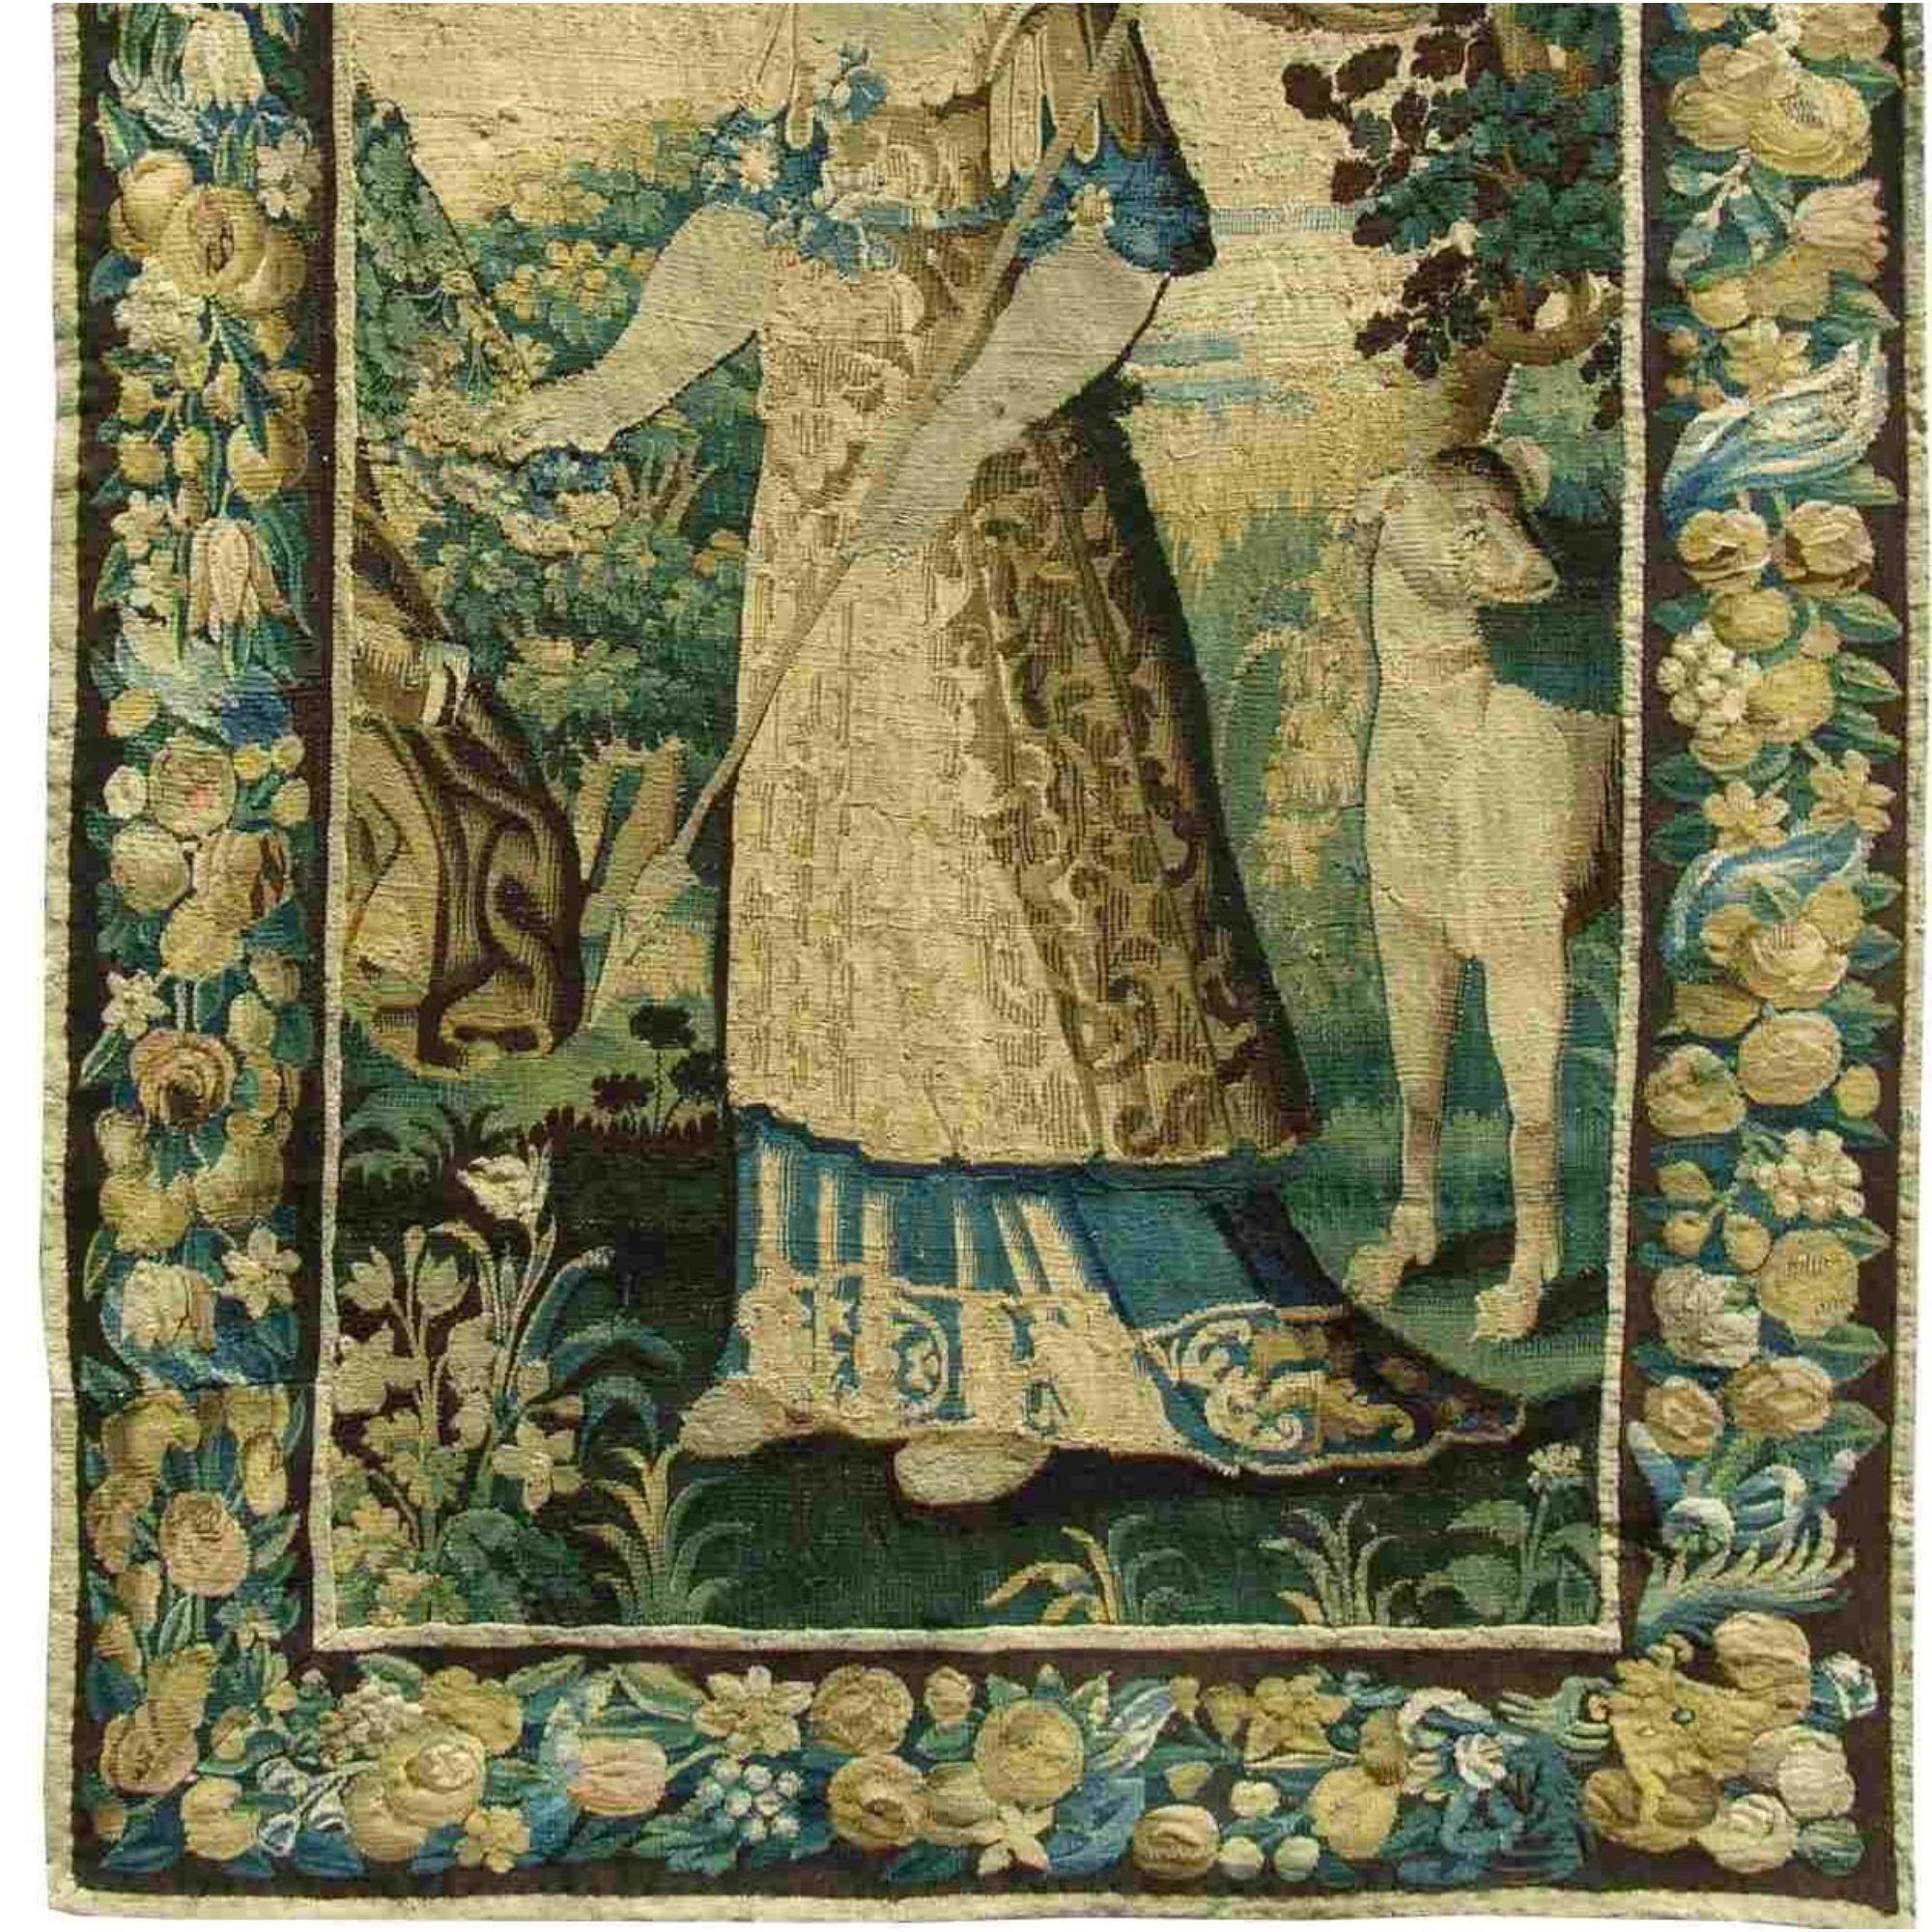 Unknown Antique 17th Century Flemish Tapestry 7'6